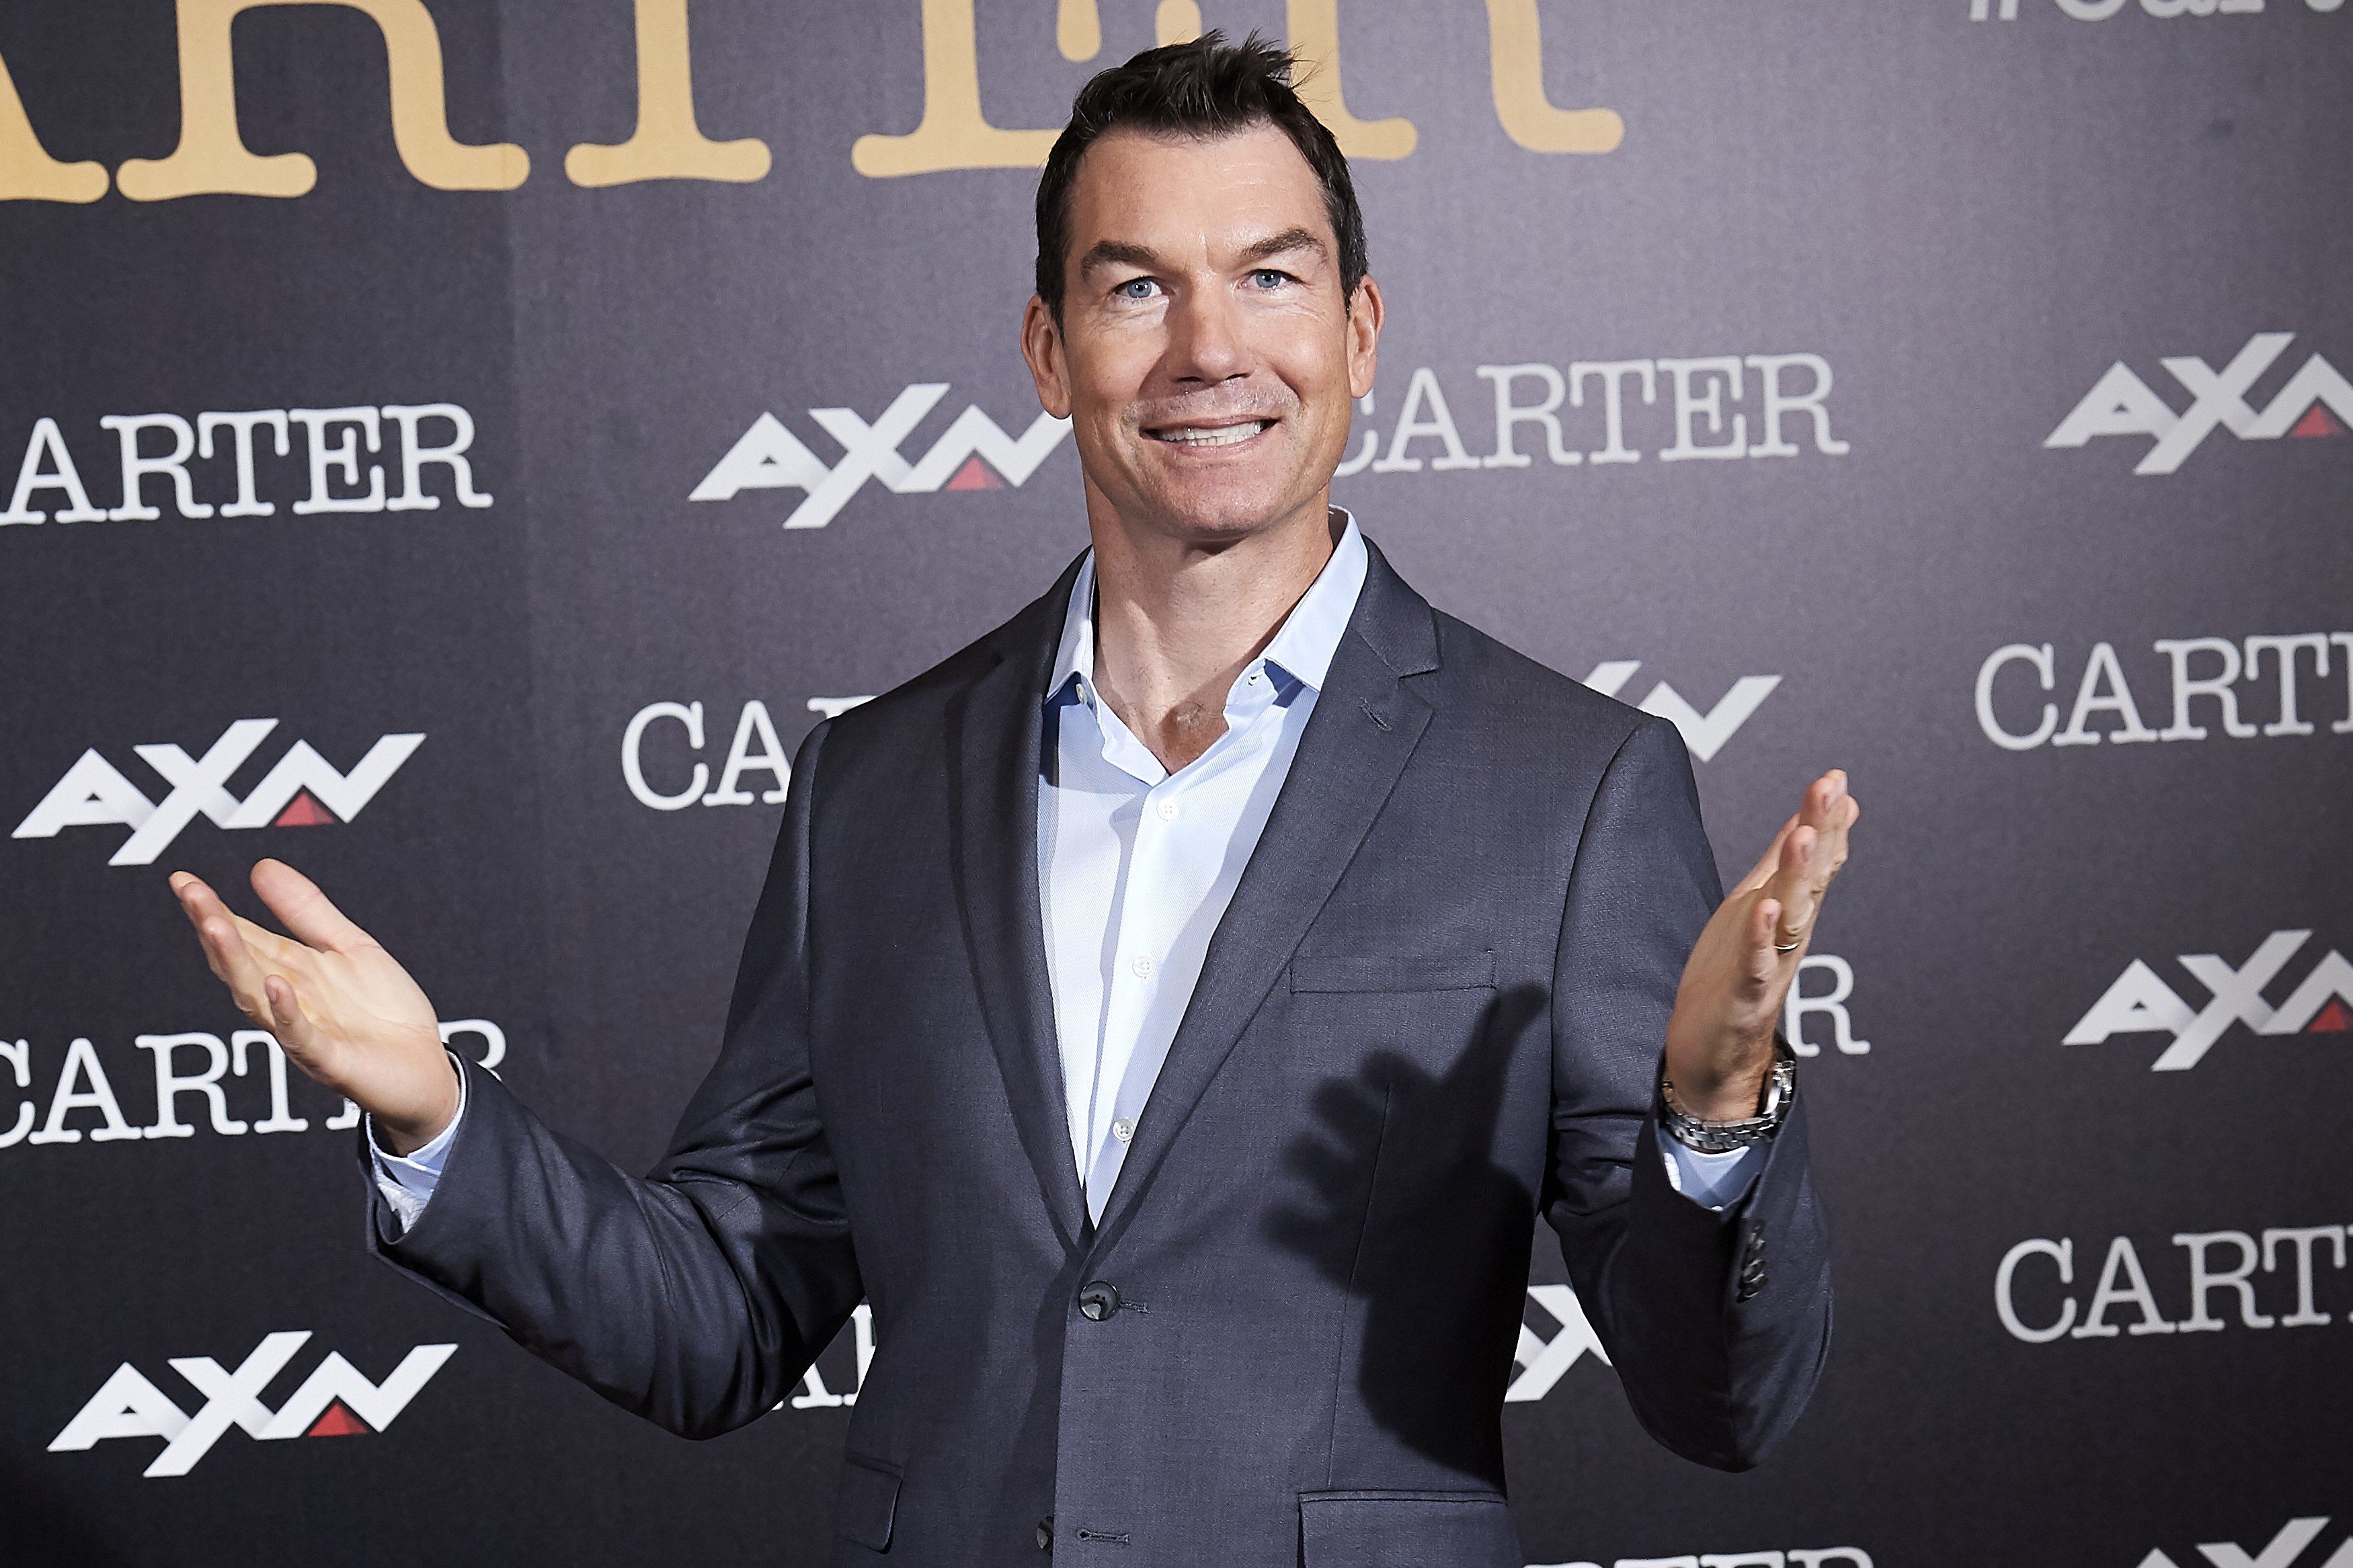 Actor Jerry O'Connell during a broadway event in 2019. | Photo: Getty Images